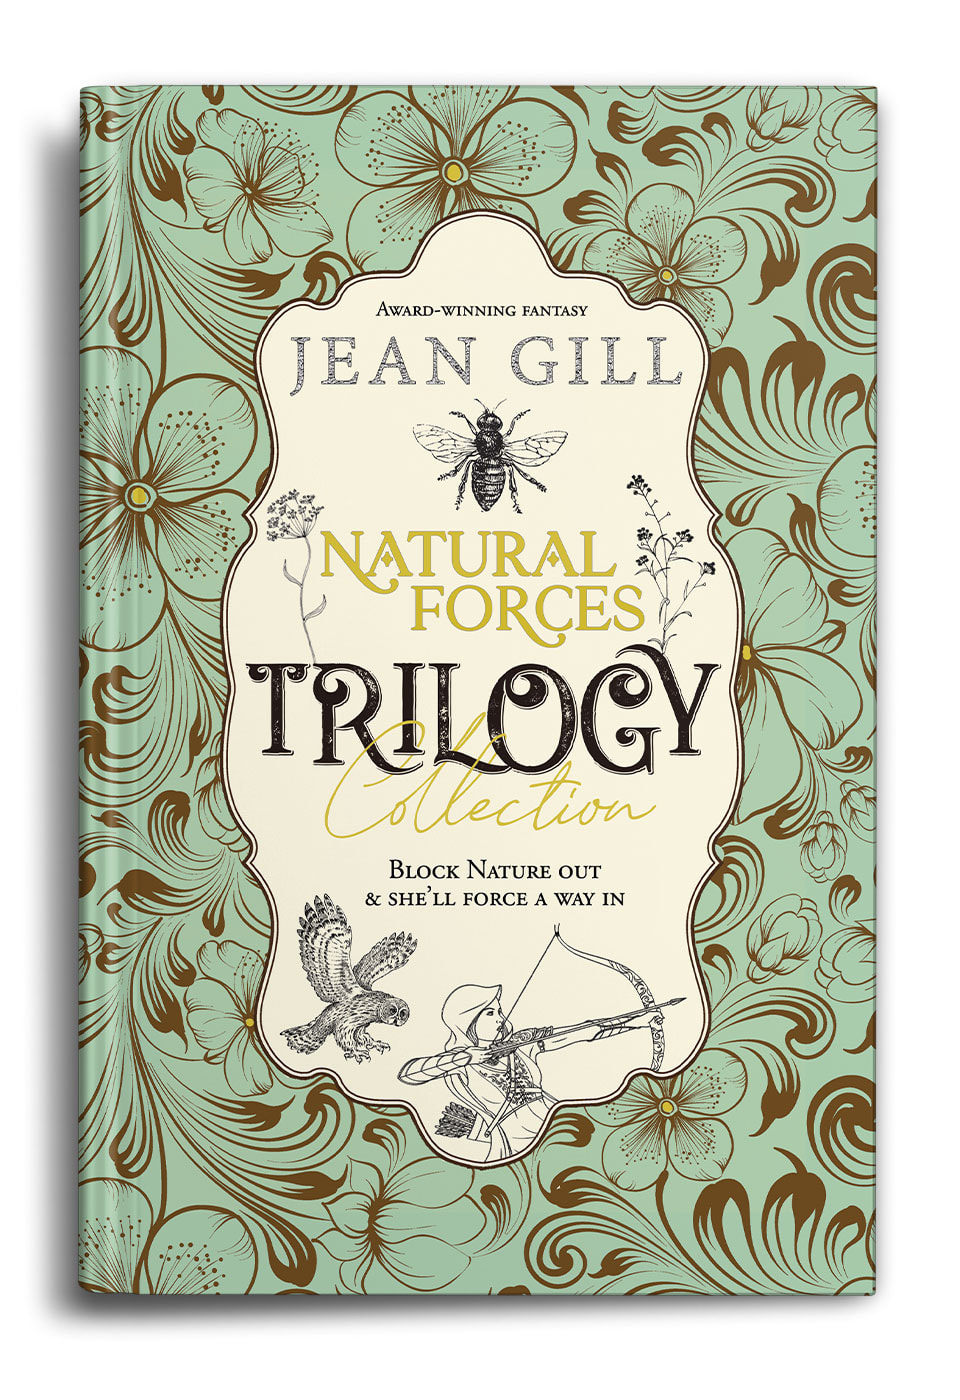 Natural-Forces-Trilogy-Collection-by-Jean-Gill